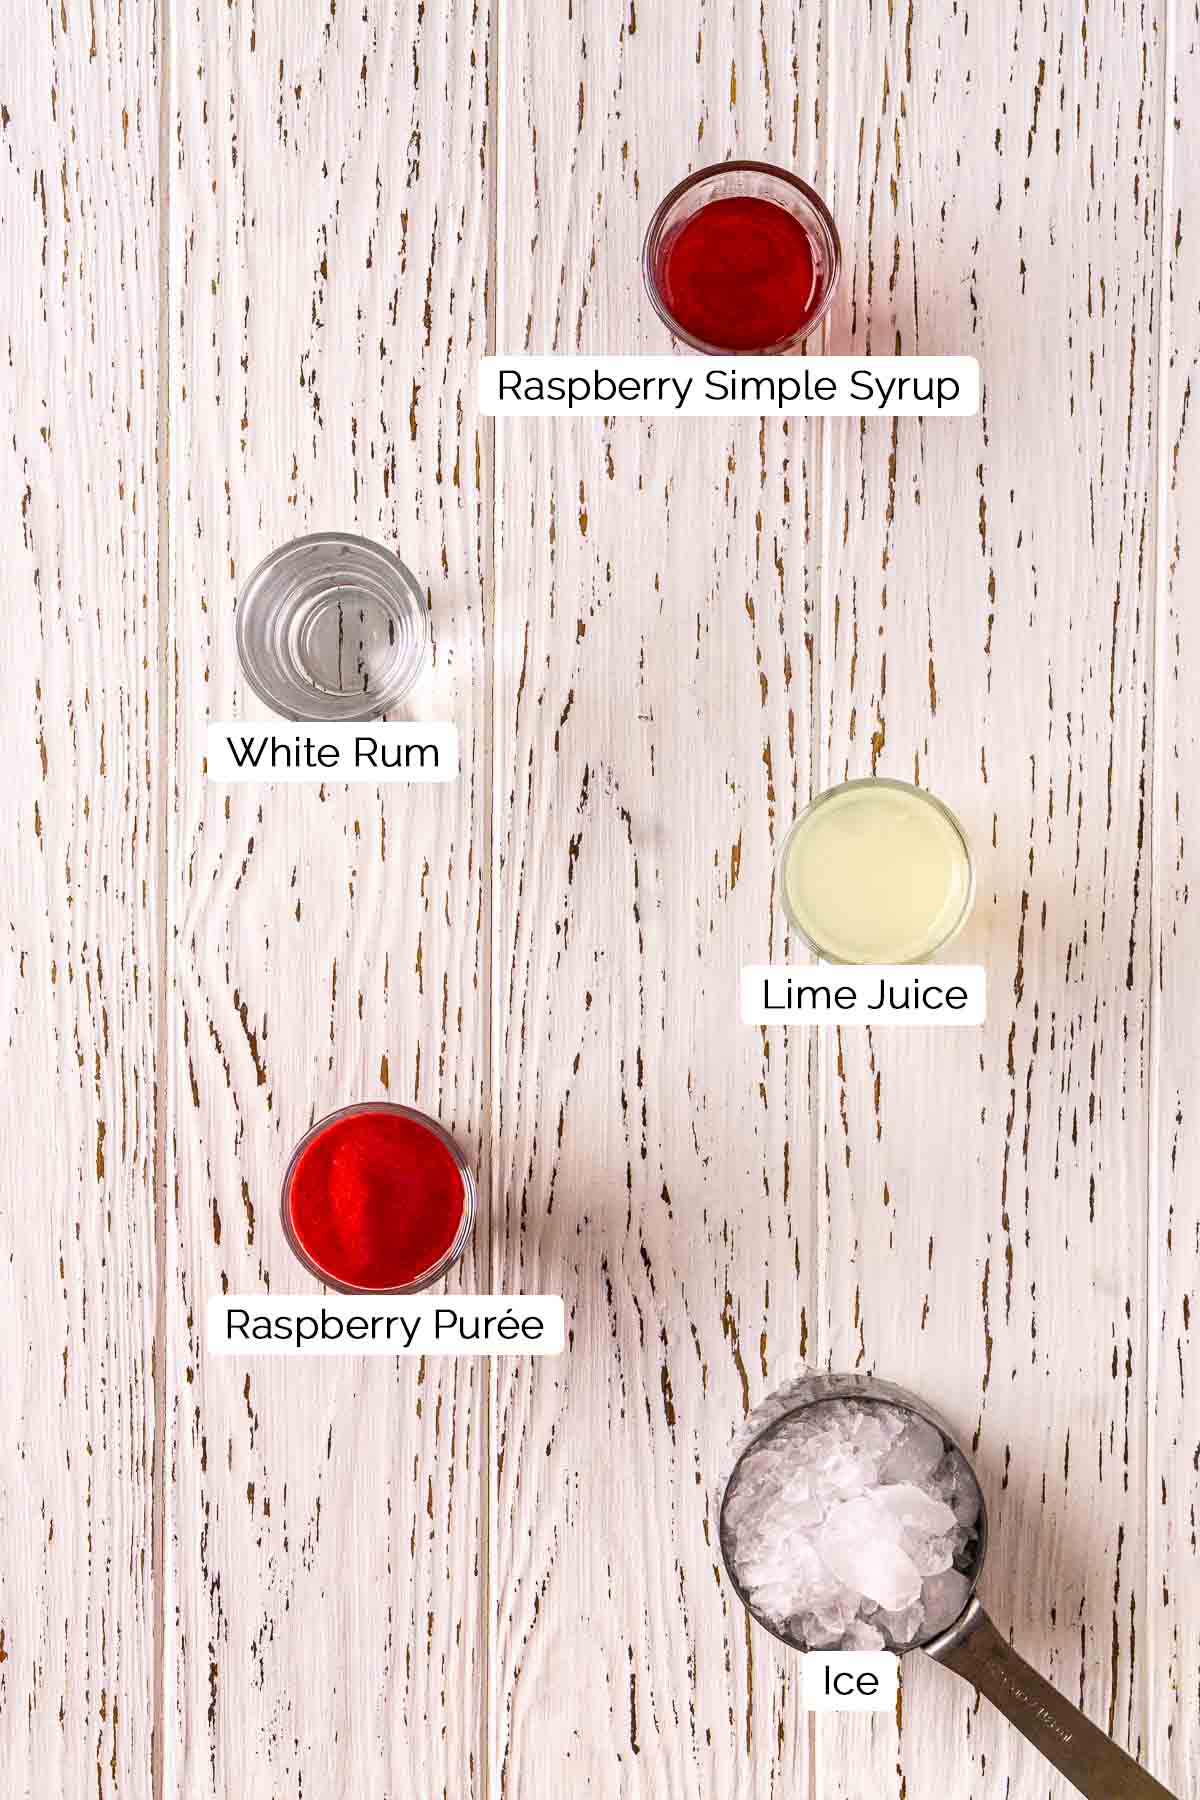 The drink ingredients with white and black labels by the items on a white distressed wooden board.